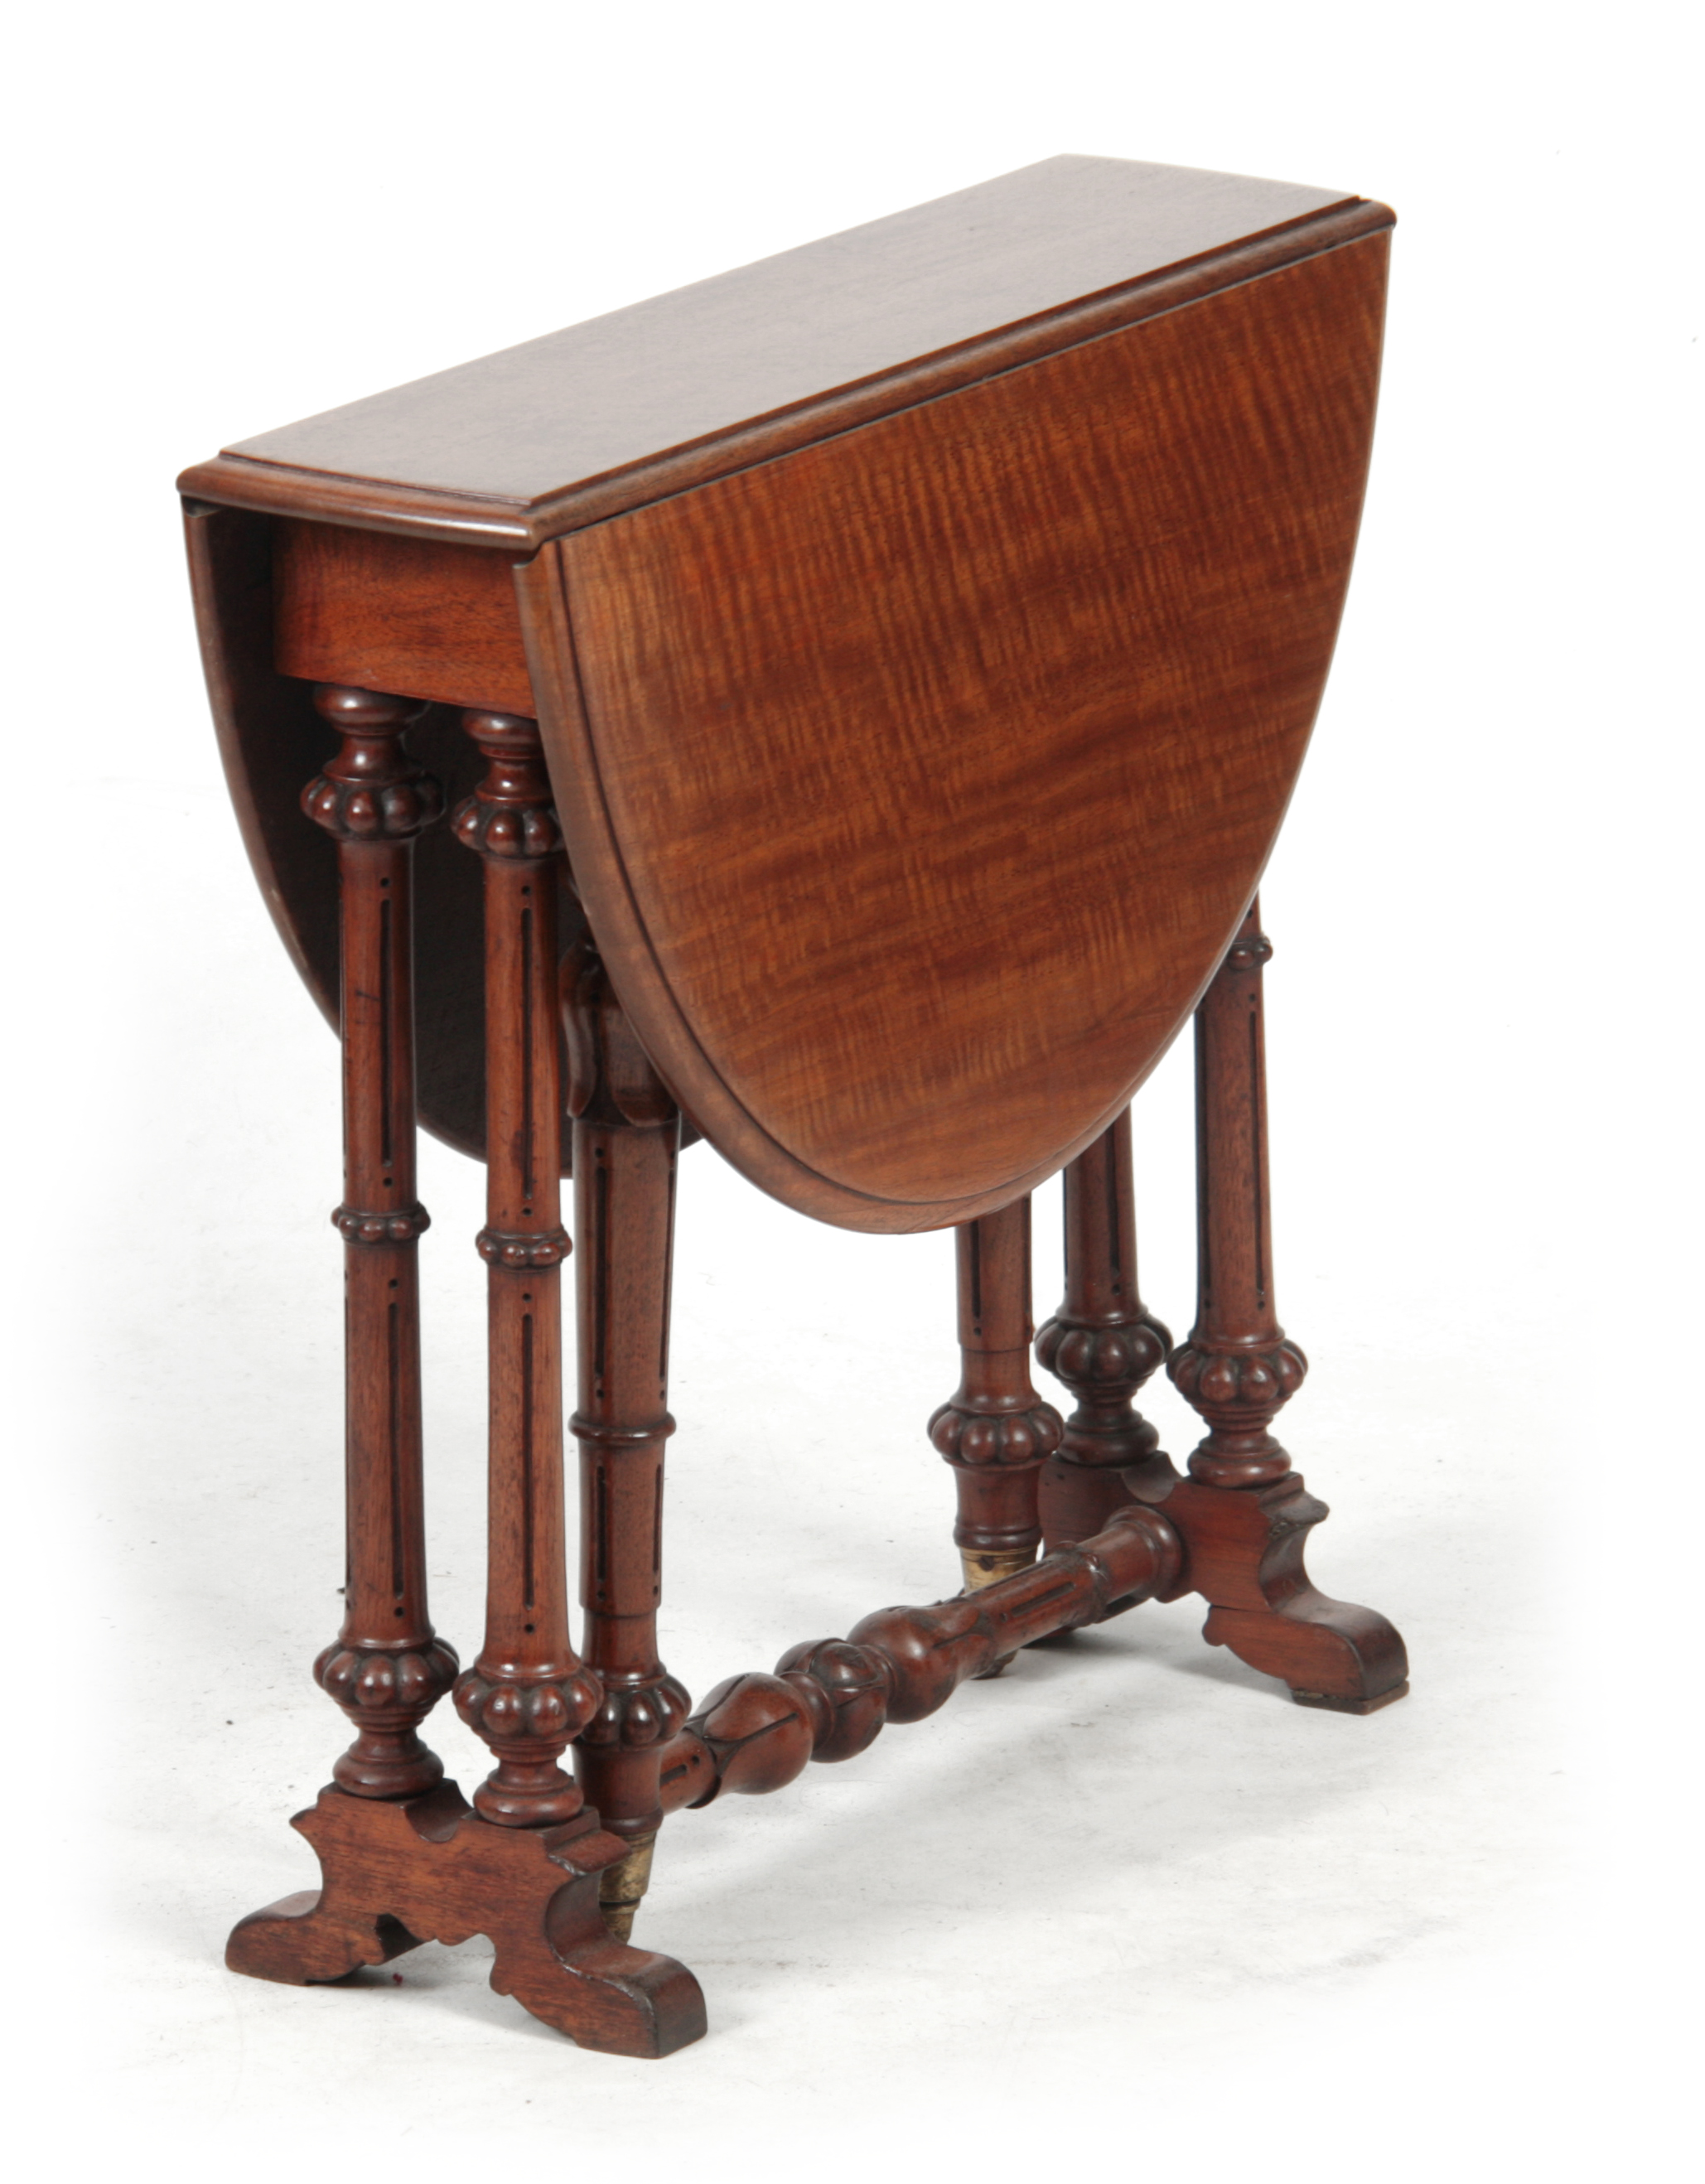 A 19TH CENTURY WALNUT MINIATURE SUTHERLAND TABLE with moulded edge oval top above a turned base with